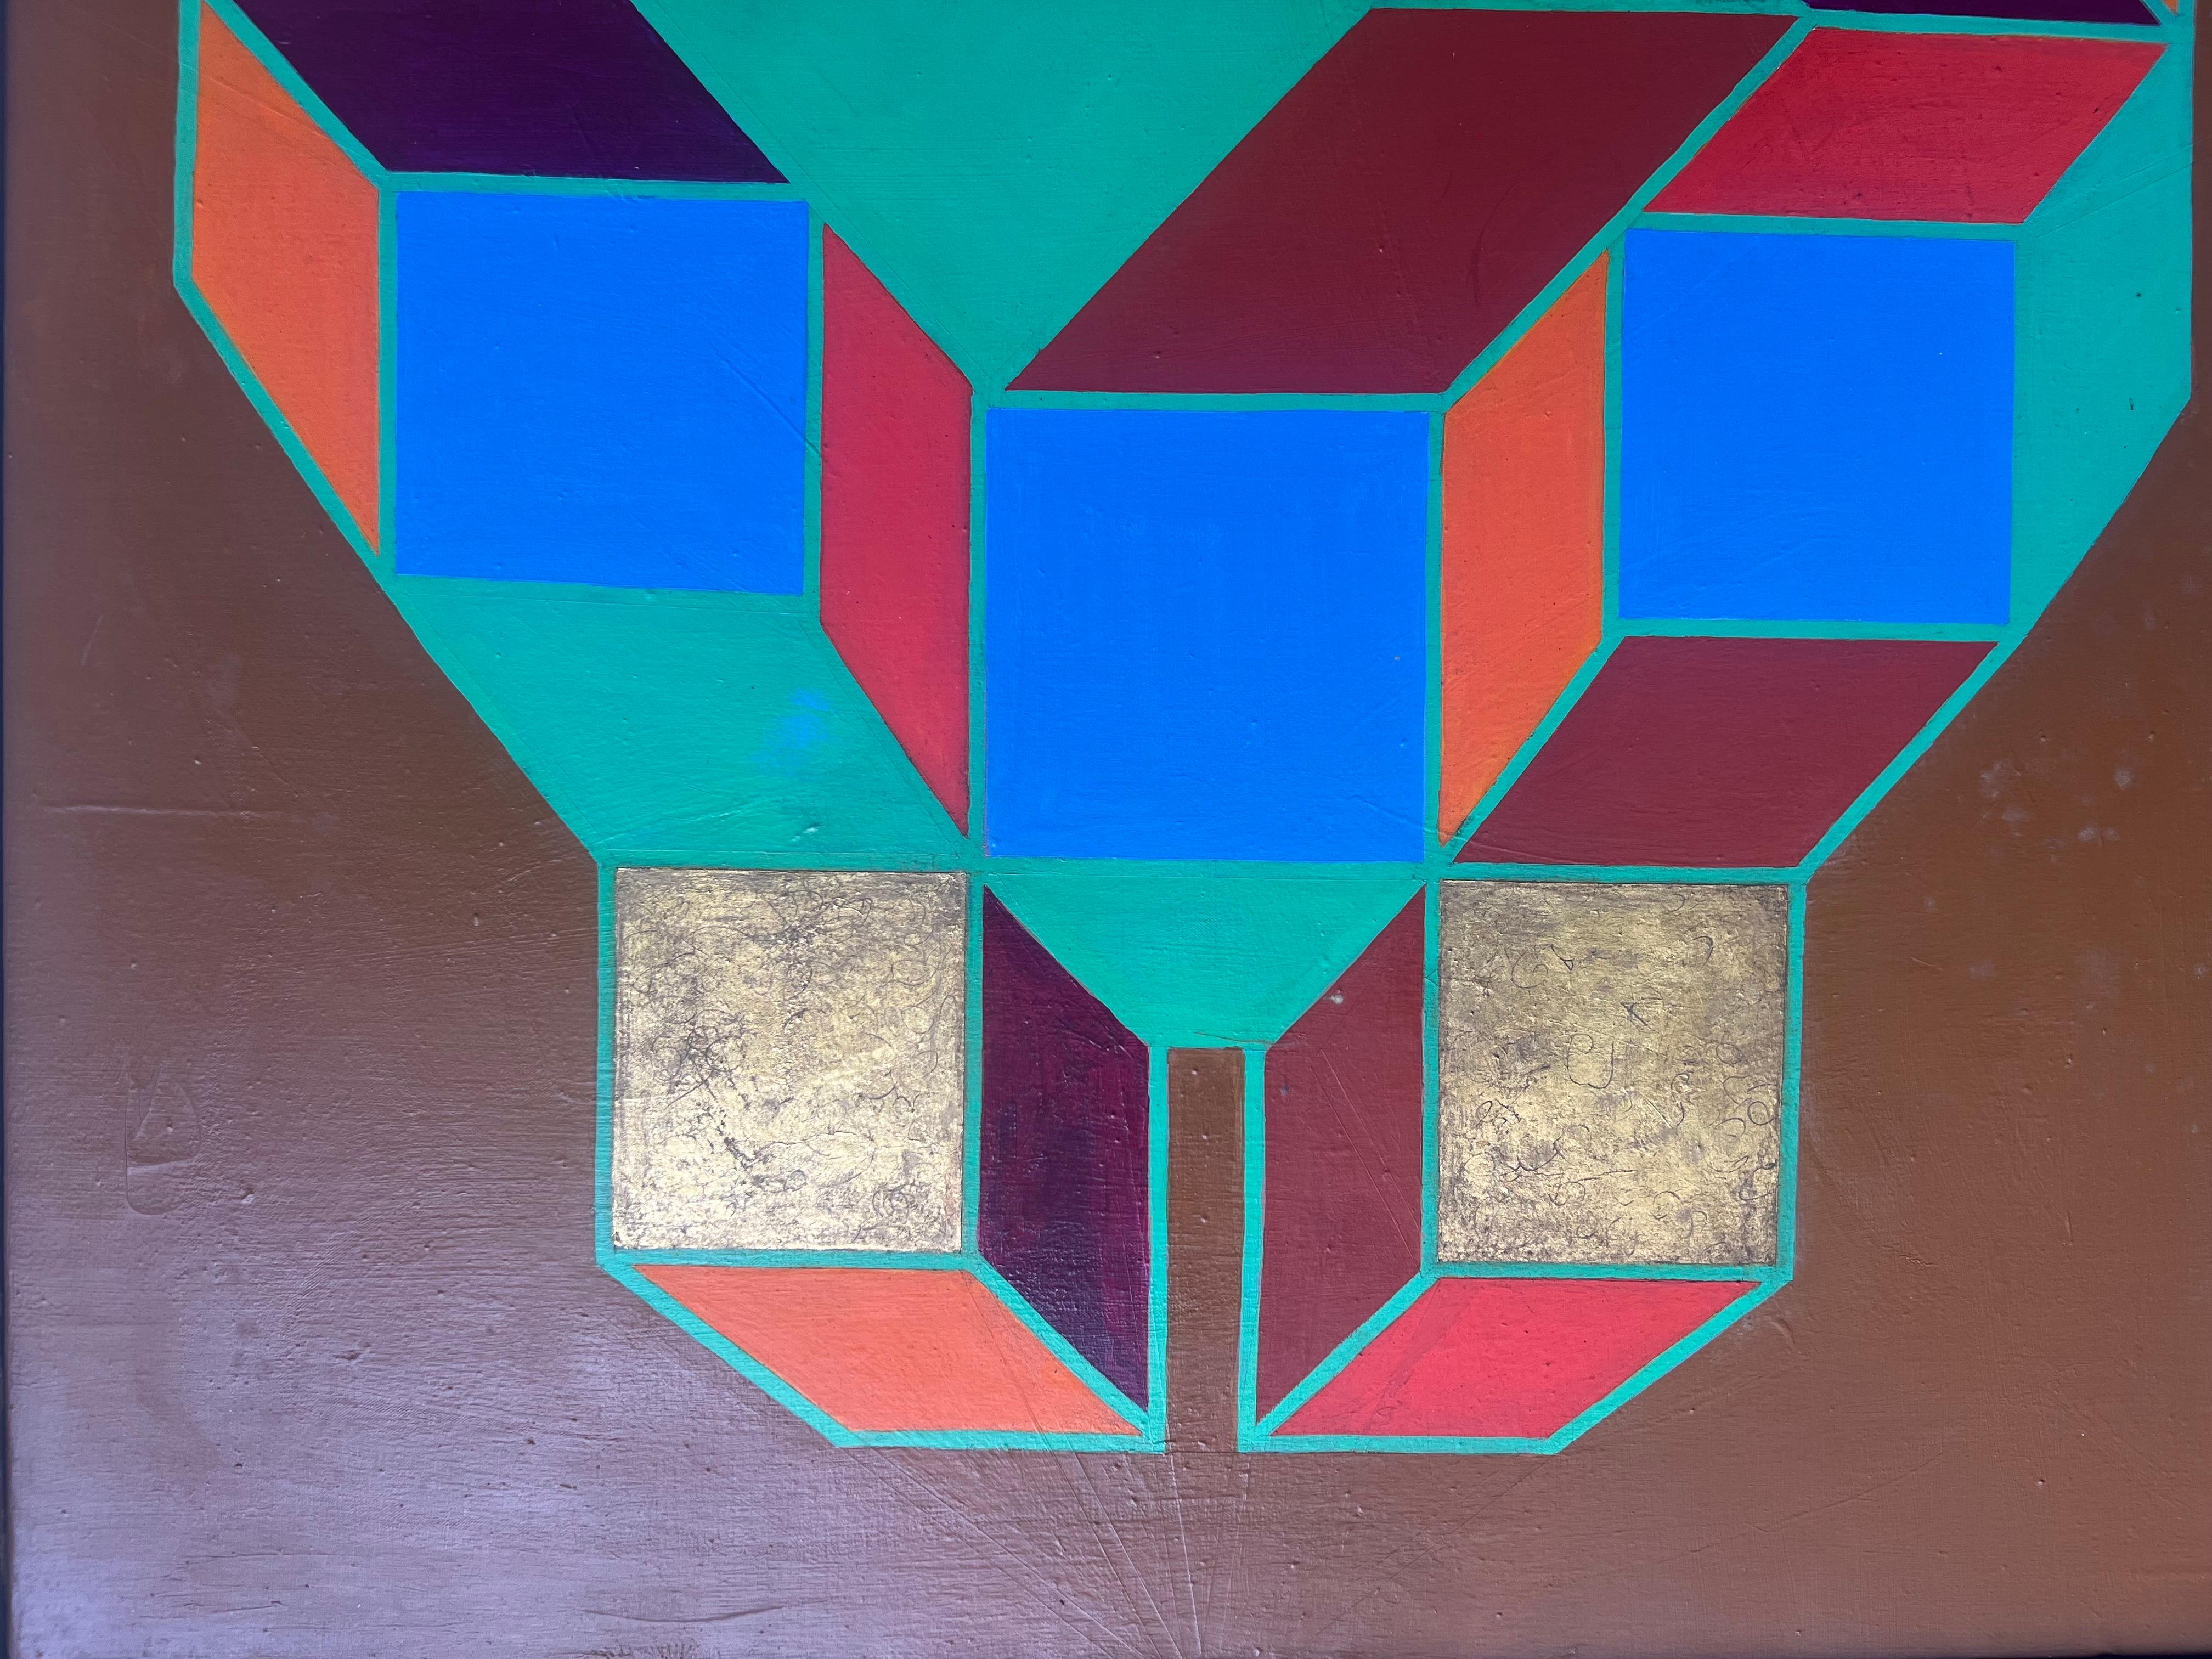 Vintage geometric artwork on canvas. Signed Claudia Carrel both front and back as pictured. We are assuming this piece was painted by the mid-century artist Claudia Carrel, b. 1921, whom was well known for her puzzle designs as the name and style